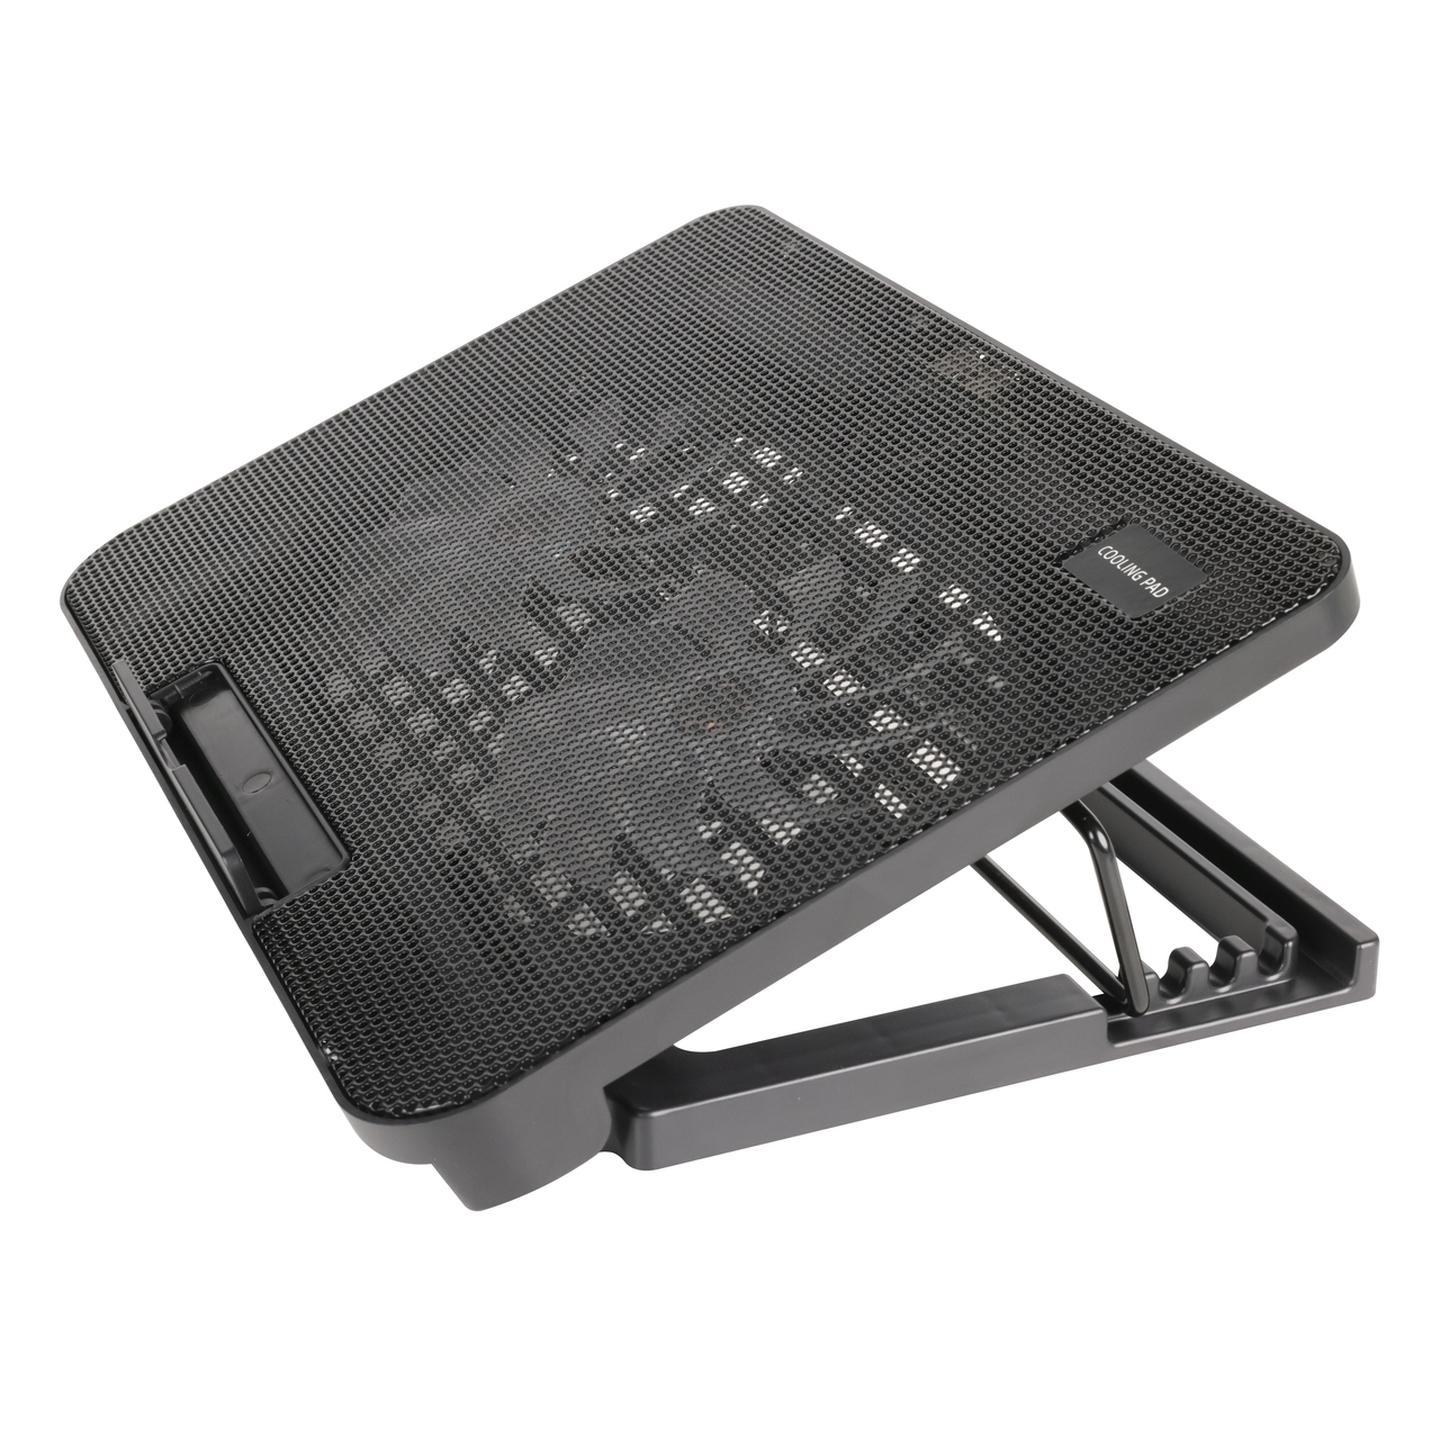 Black Dual Fan Cooling Pad for Notepads